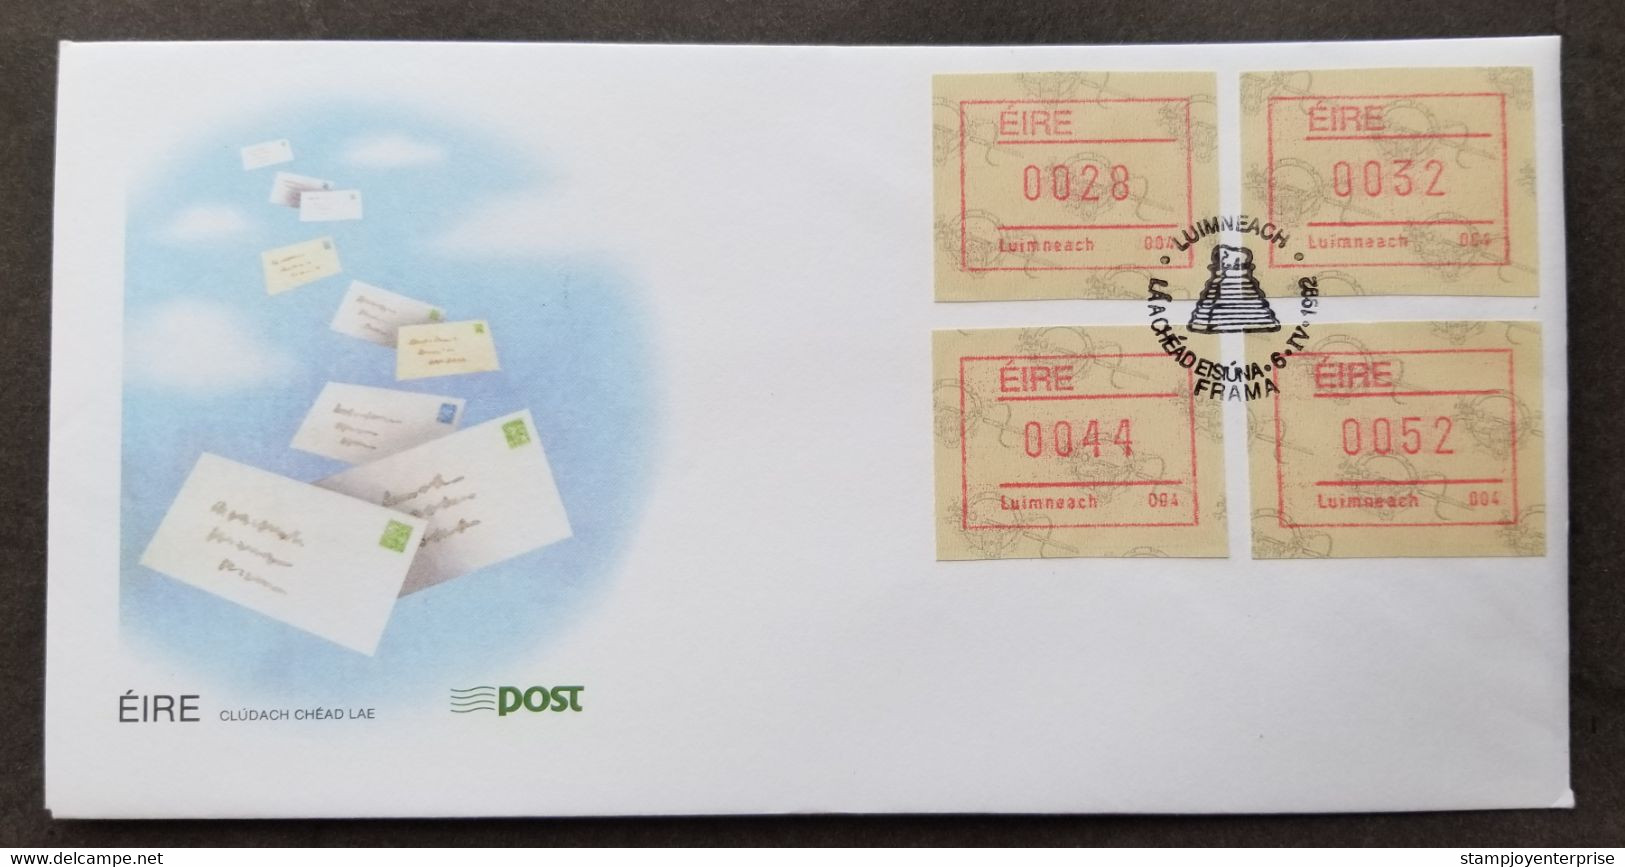 Ireland Machine Frama Label 1992 Letter Mail Postal (ATM Stamp FDC) - Covers & Documents